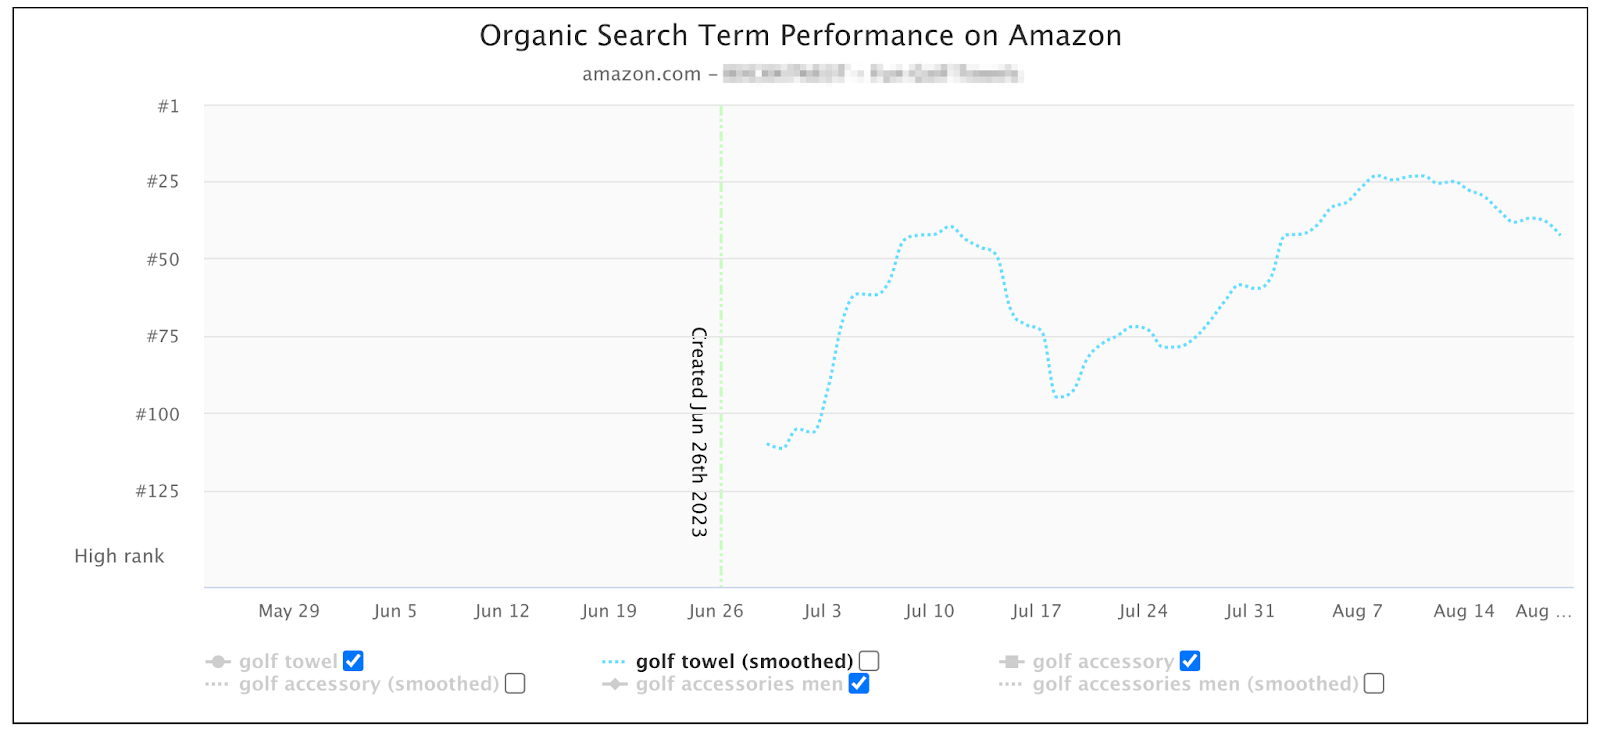 Organic Search Term Performance Results